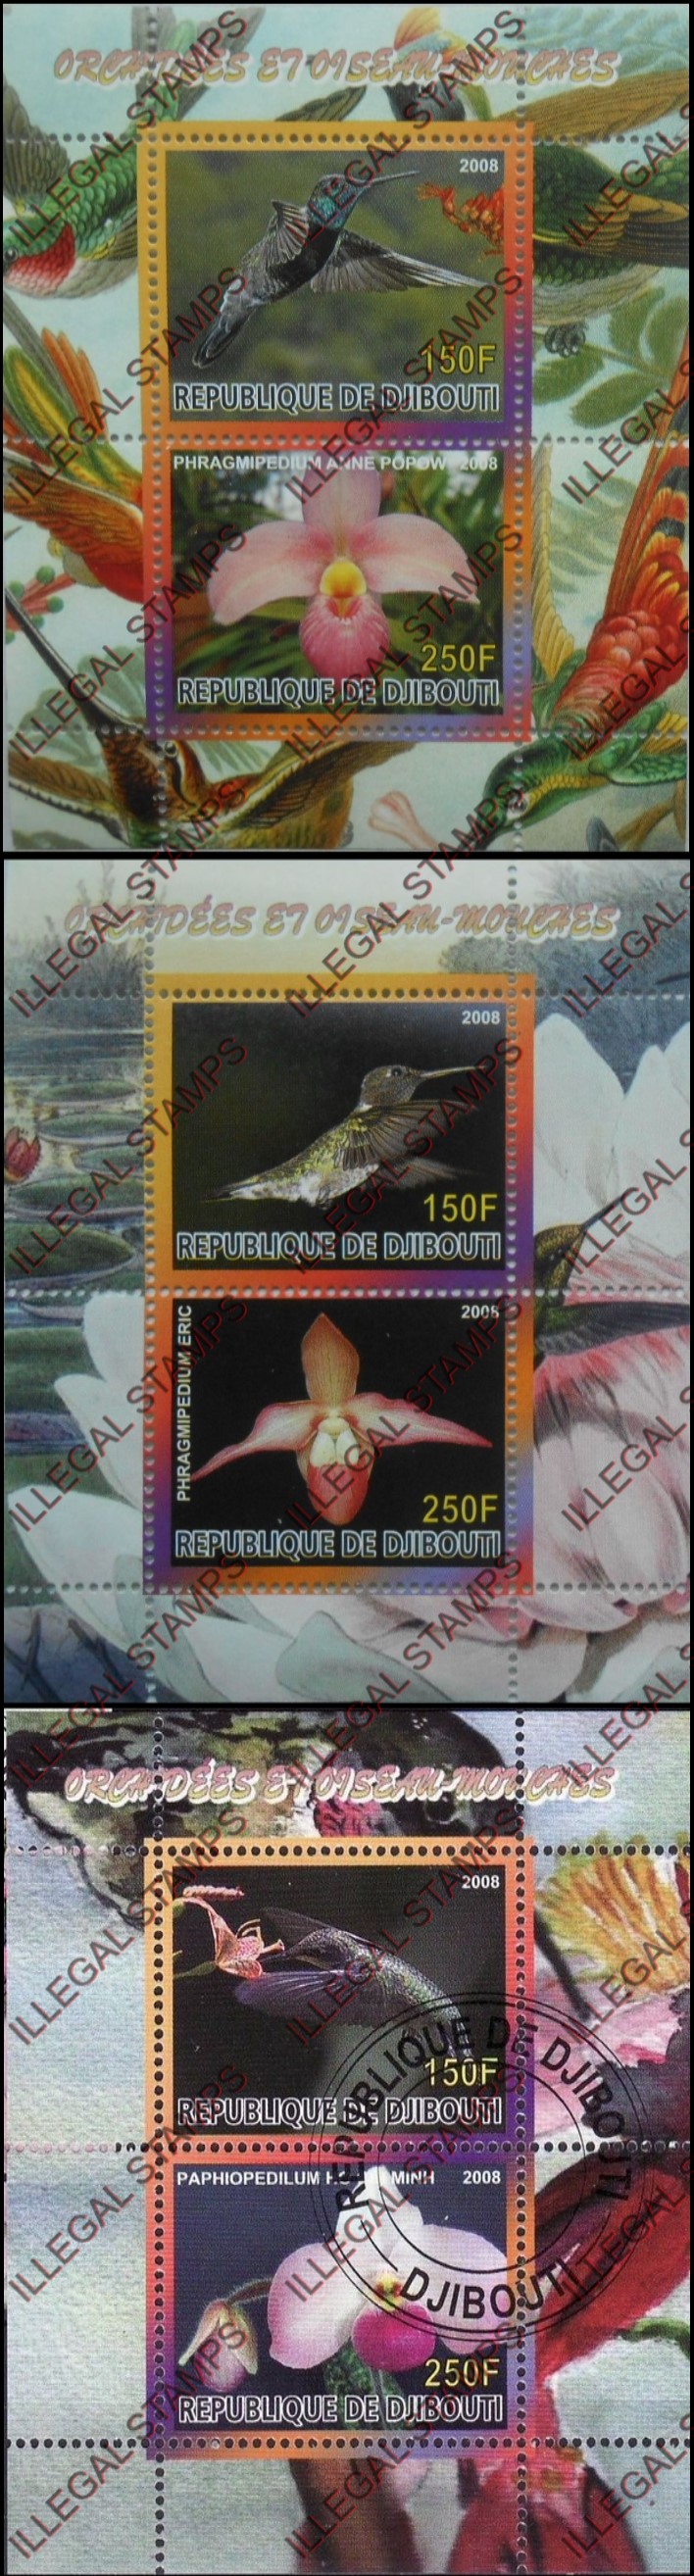 Djibouti 2008 Birds and Orchids Illegal Stamp Souvenir Sheets of 2